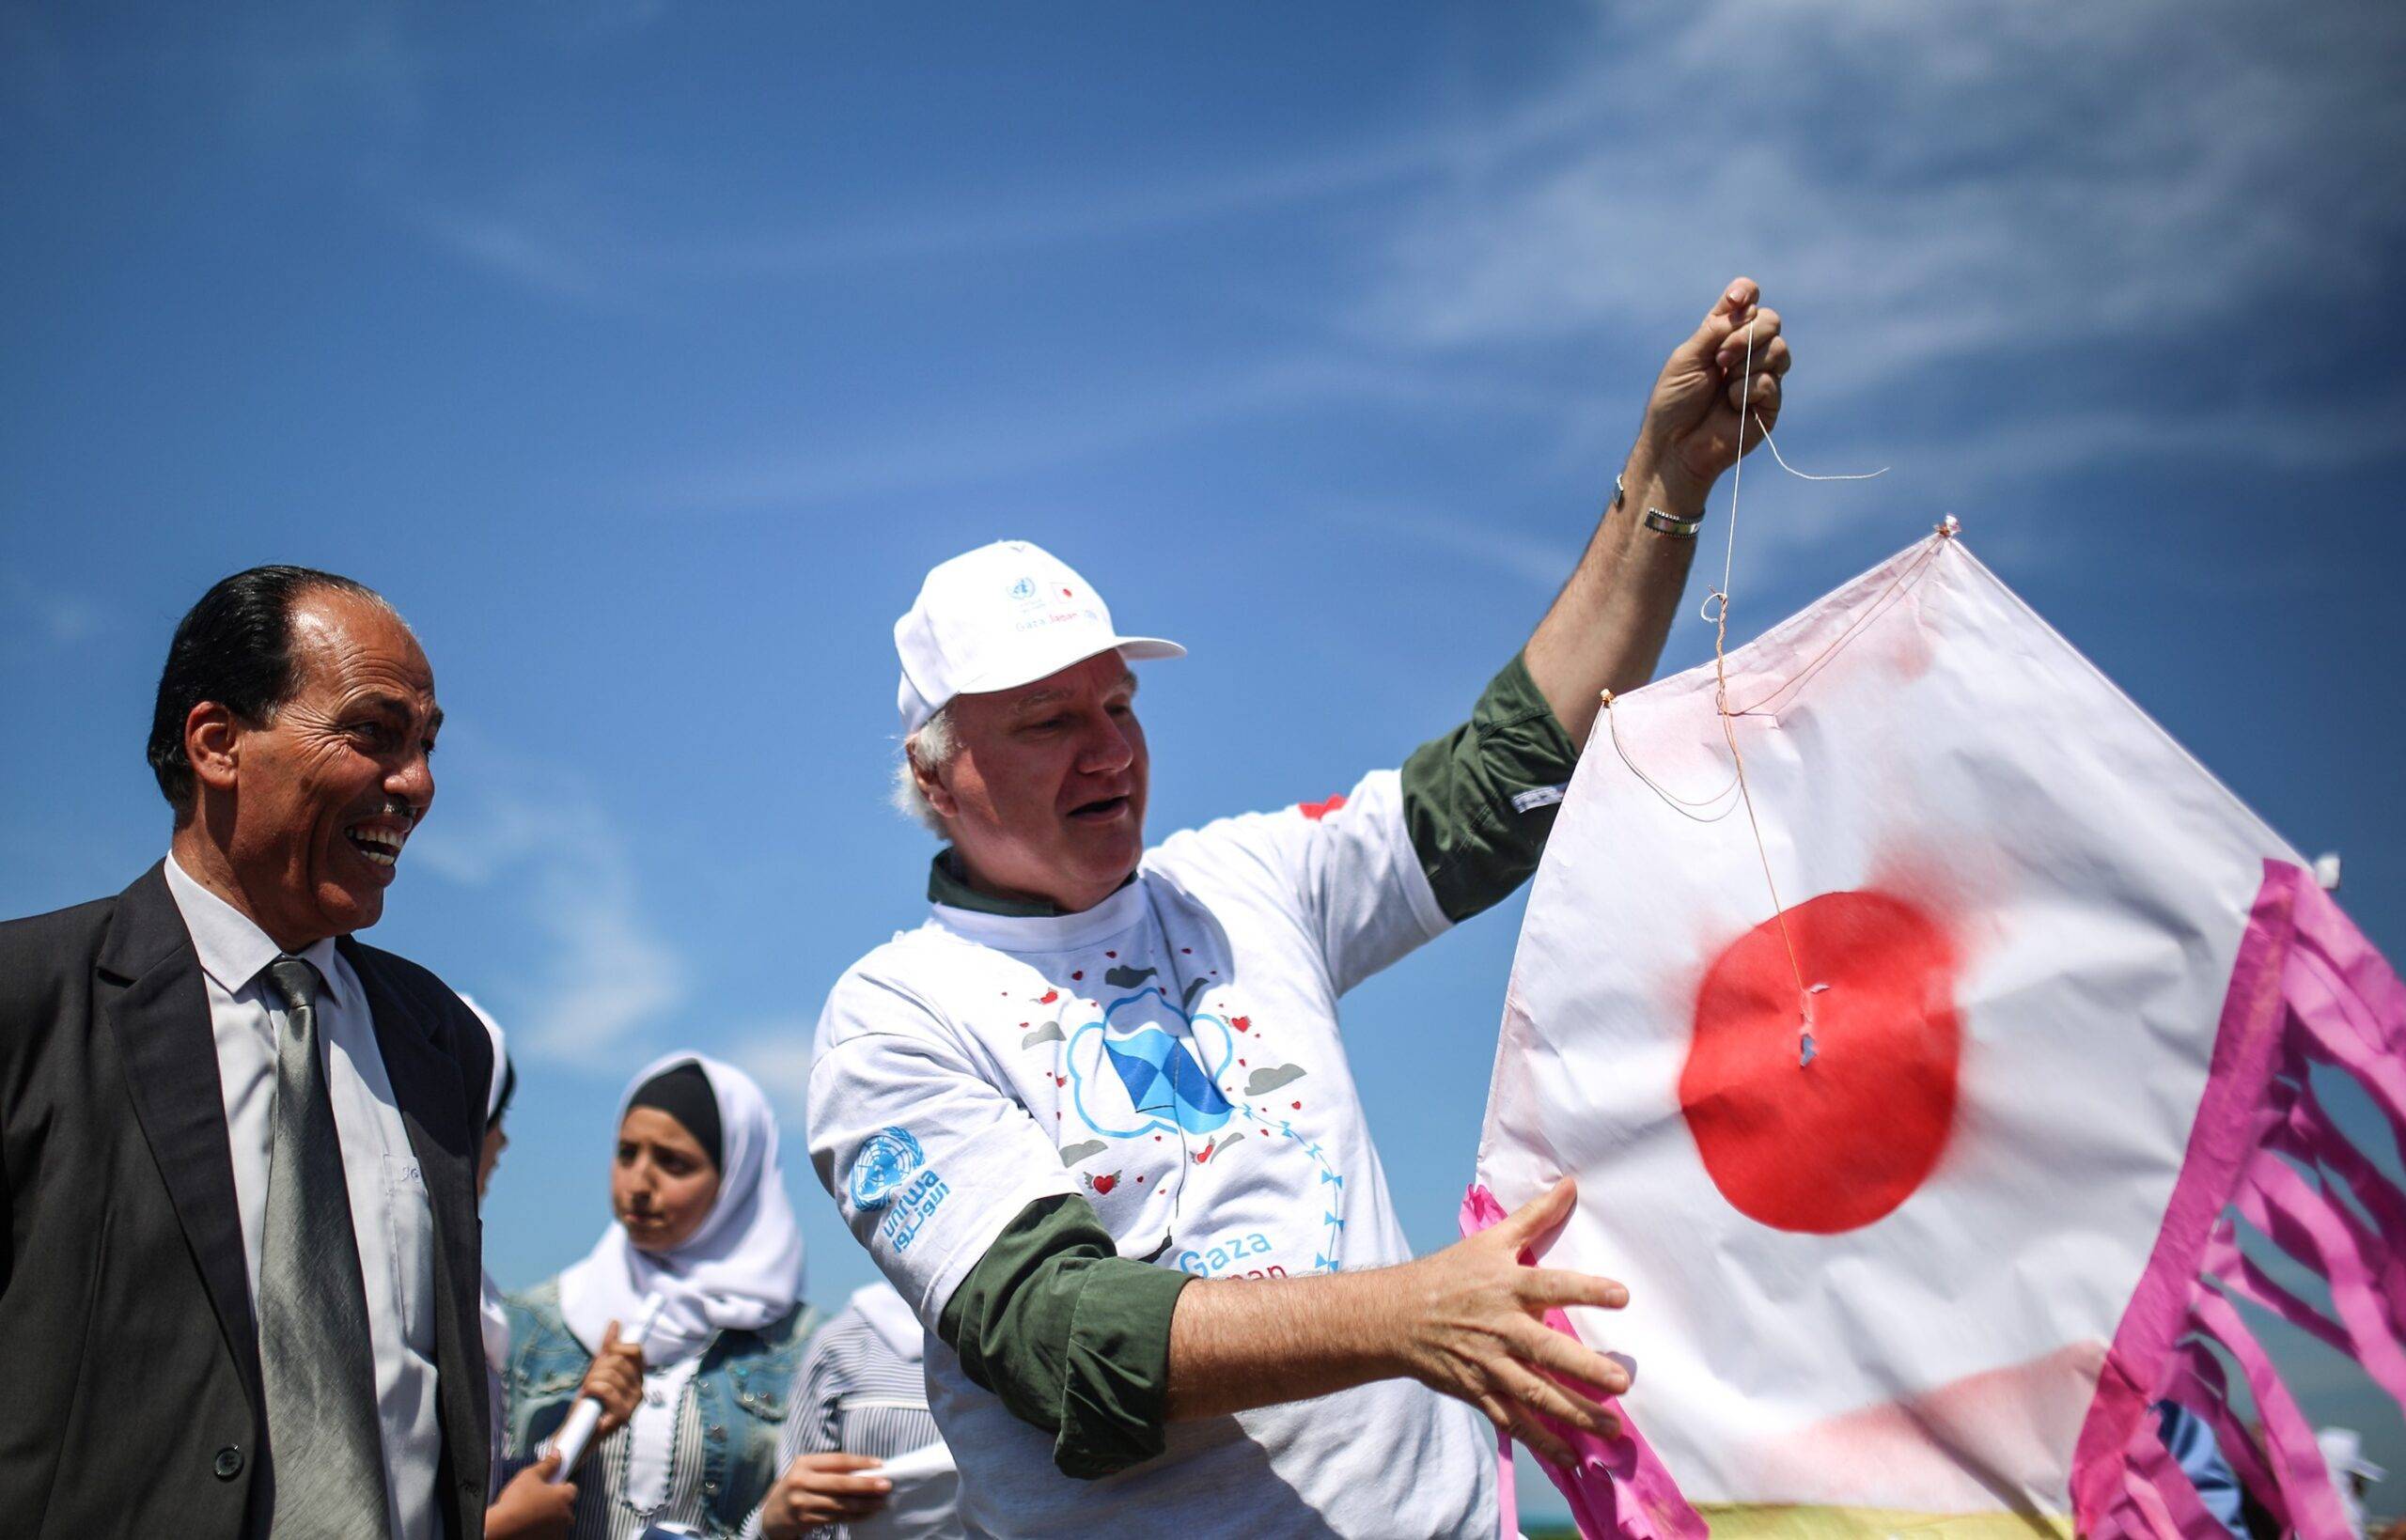 Director of Operations in Gaza of UNRWA, Matthias Schmale (R) holds a Japanese flag kite at an event organised by United Nations Relief and Works Agency for Palestine Refugees (UNRWA) on March 13, 2018 in Khan Yunis, Gaza [Mustafa Hassona/Anadolu Agency/Getty Images]